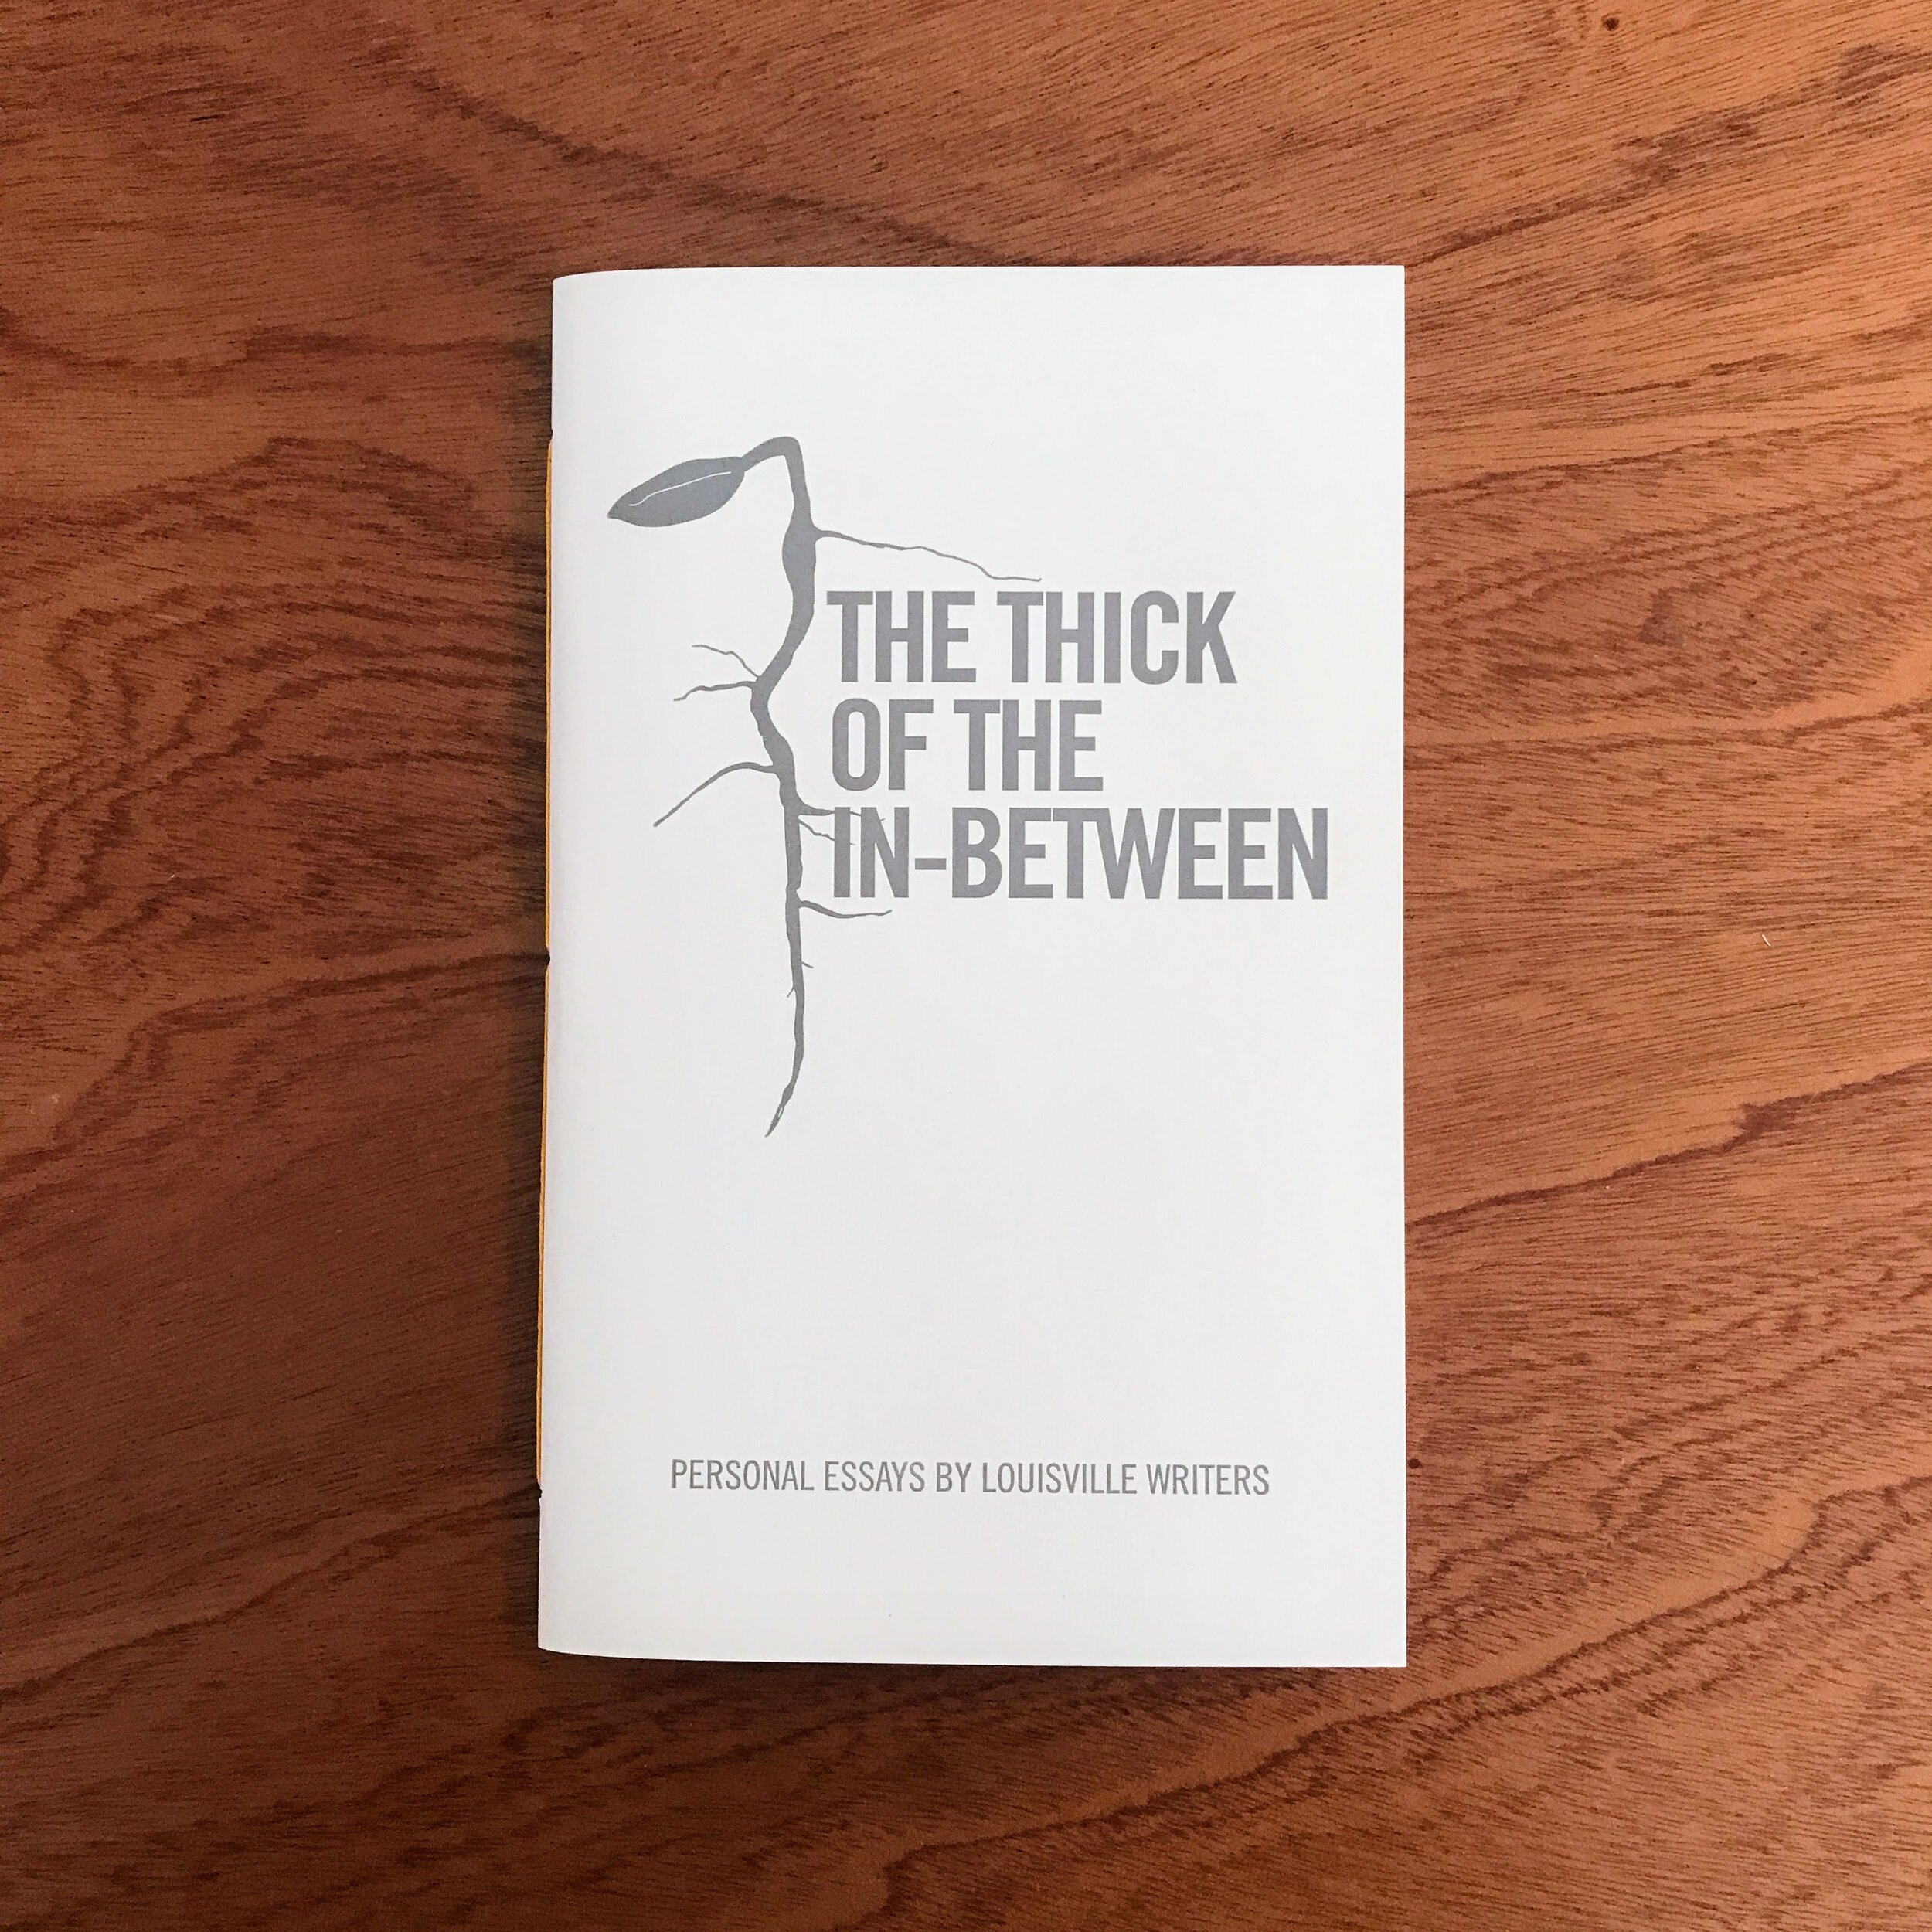 VOL. 16, THE THICK OF THE IN-BETWEEN